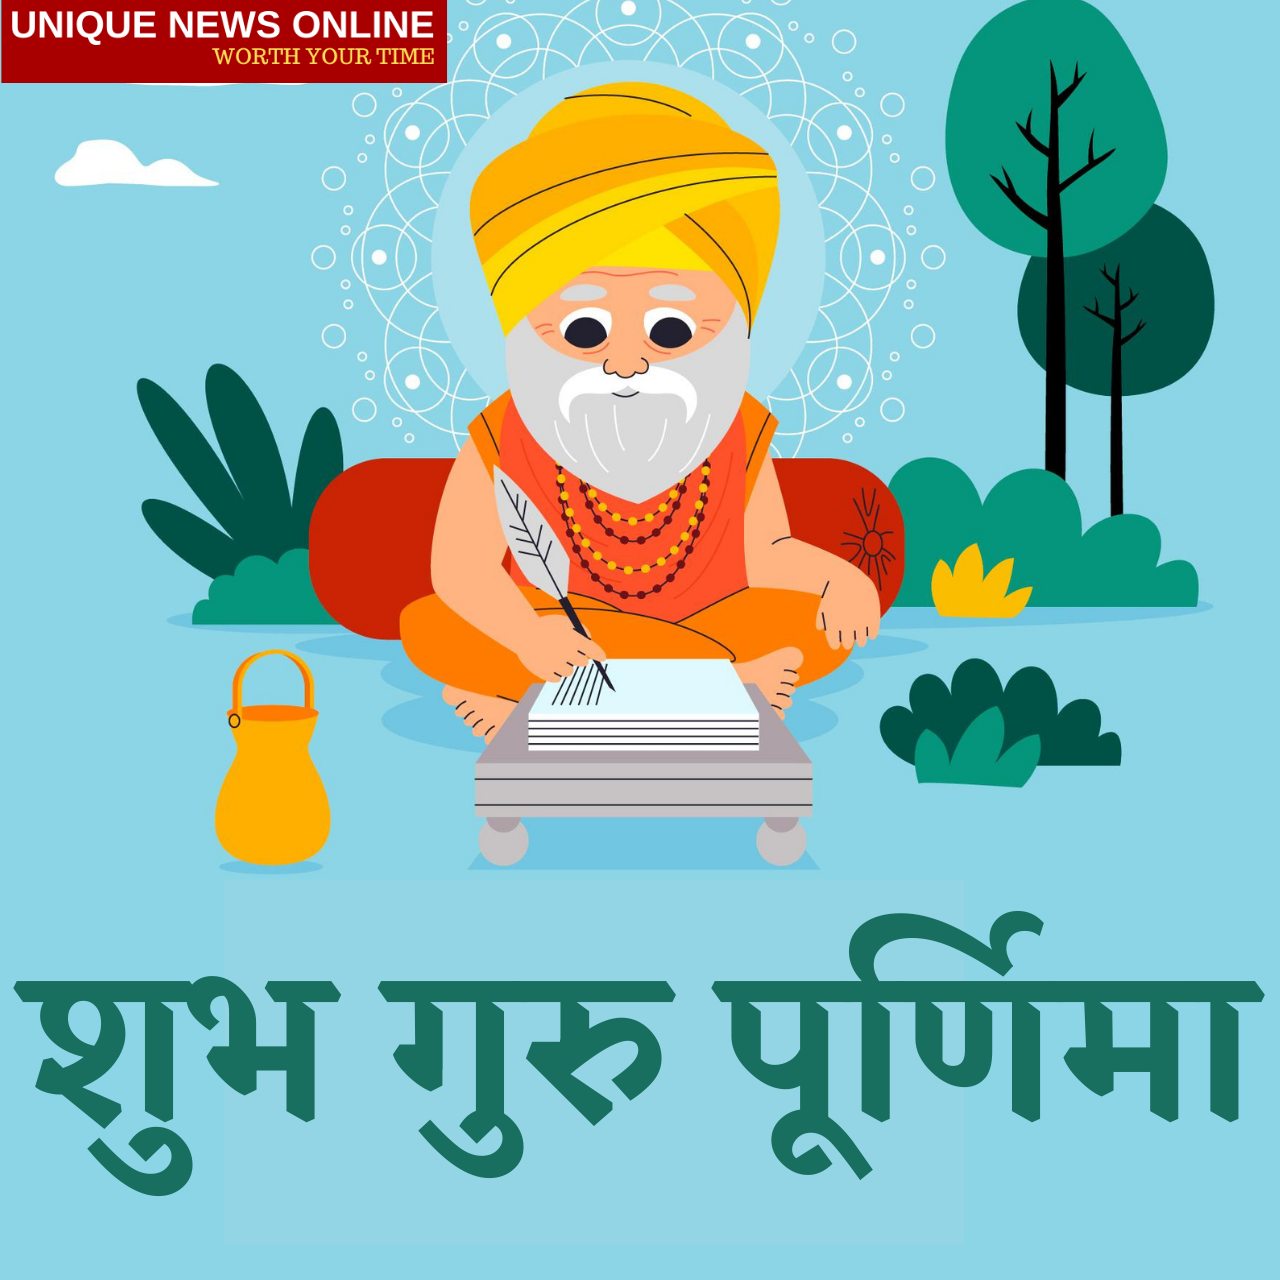 Guru Purnima 2021 Sanskrit Quotes, HD Images, Wishes, Status, Greetings, and Messages to share